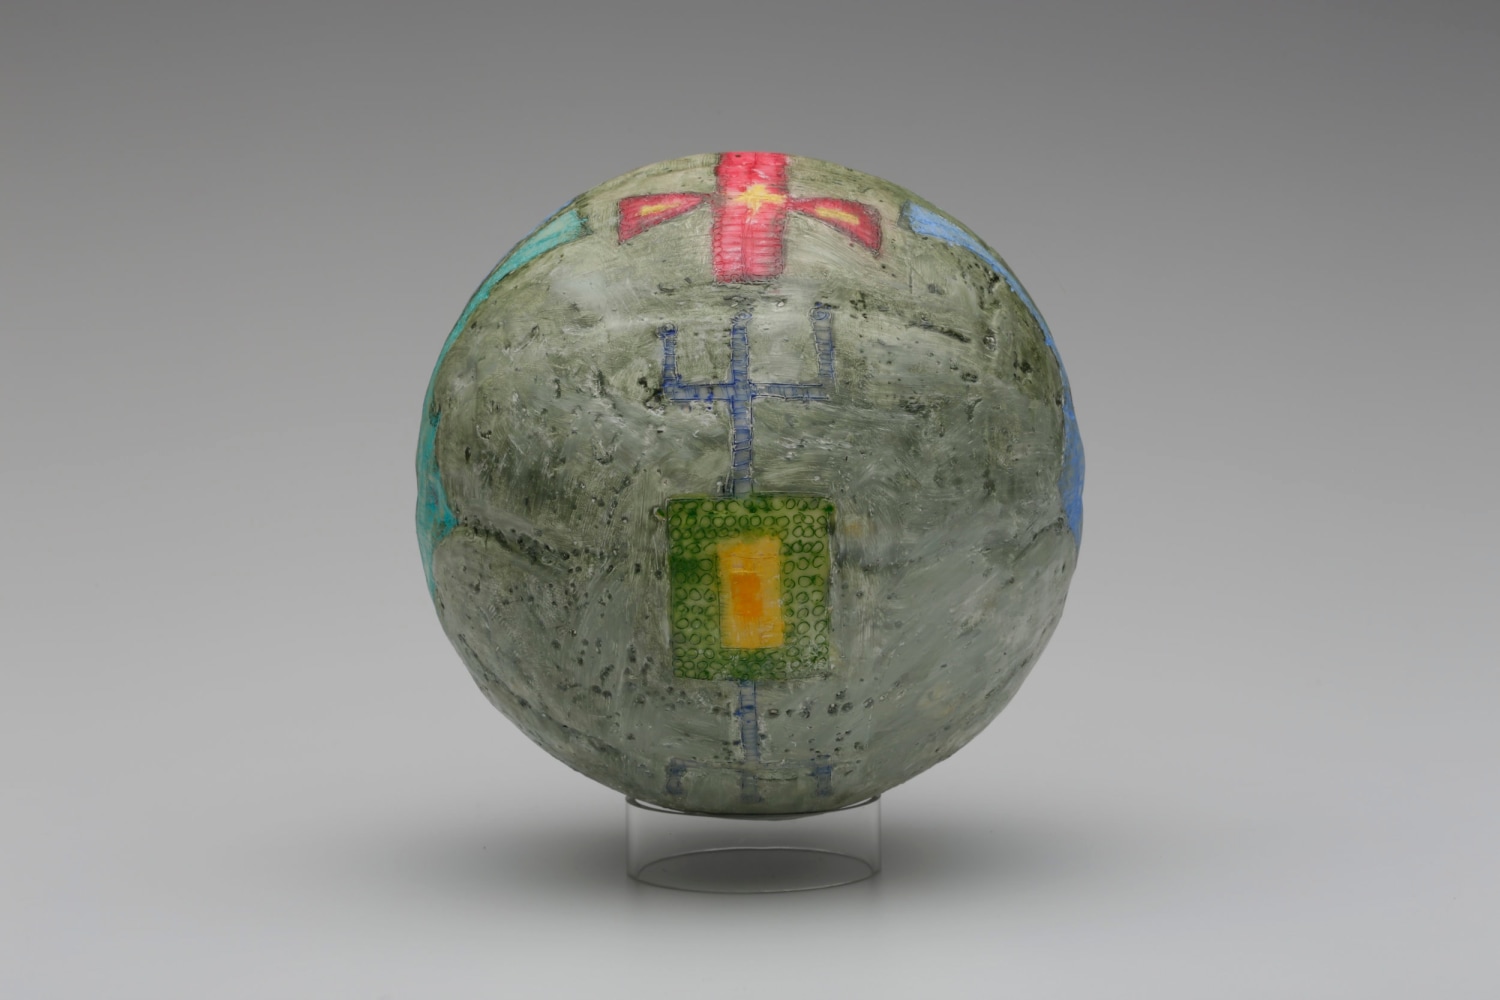 Gina Adams
Honoring Modern Spirit Before 11, 2015
Oil and encaustic on ceramic
9 inches round
Courtesy of the Artist and Fort Gansevoort